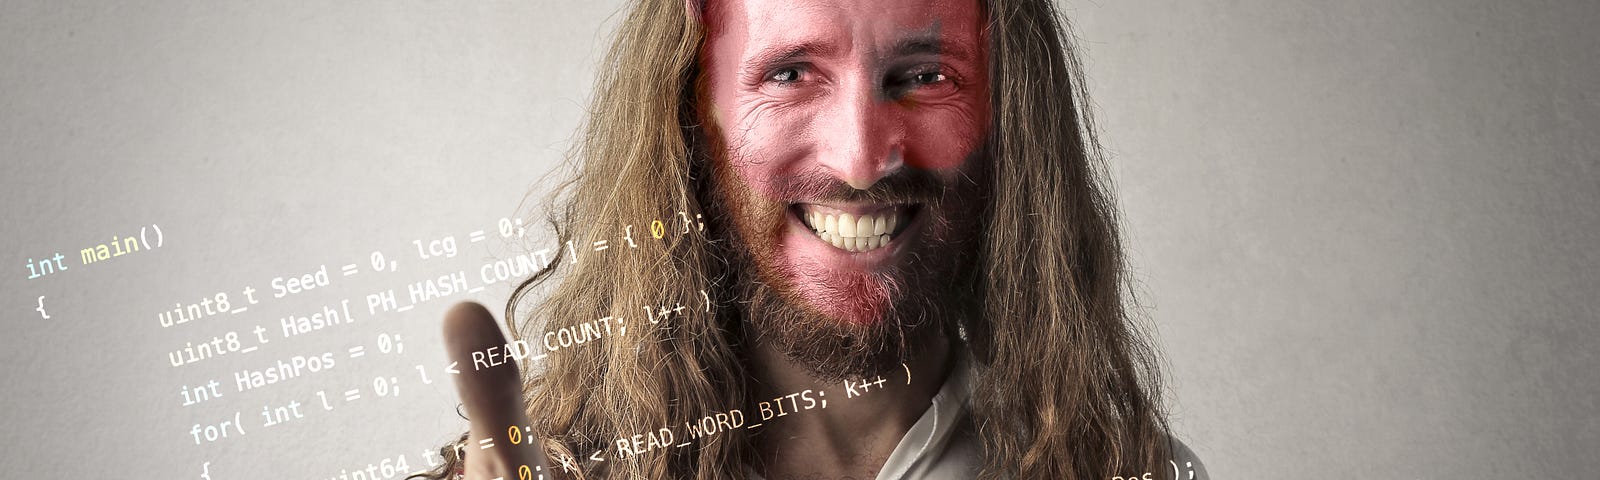 Image of Jesus licensed through Adobe Stock. Code image created from code on GitHub via open source MIT license. Photo smashup by author